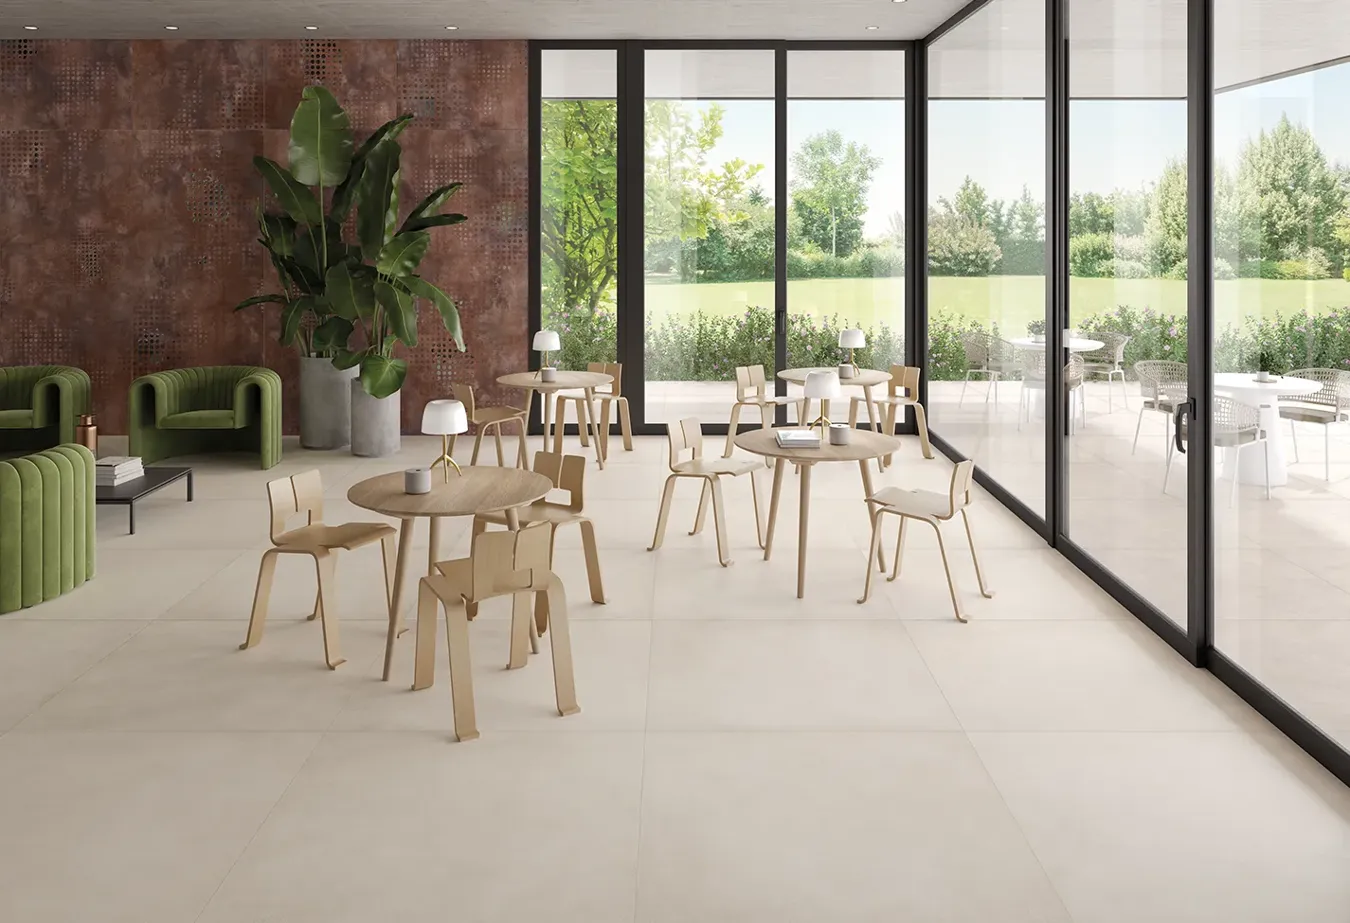 Contemporary communal area with beige tiled flooring, furnished with light wood tables and chairs, overlooking an outdoor garden through expansive glass windows.